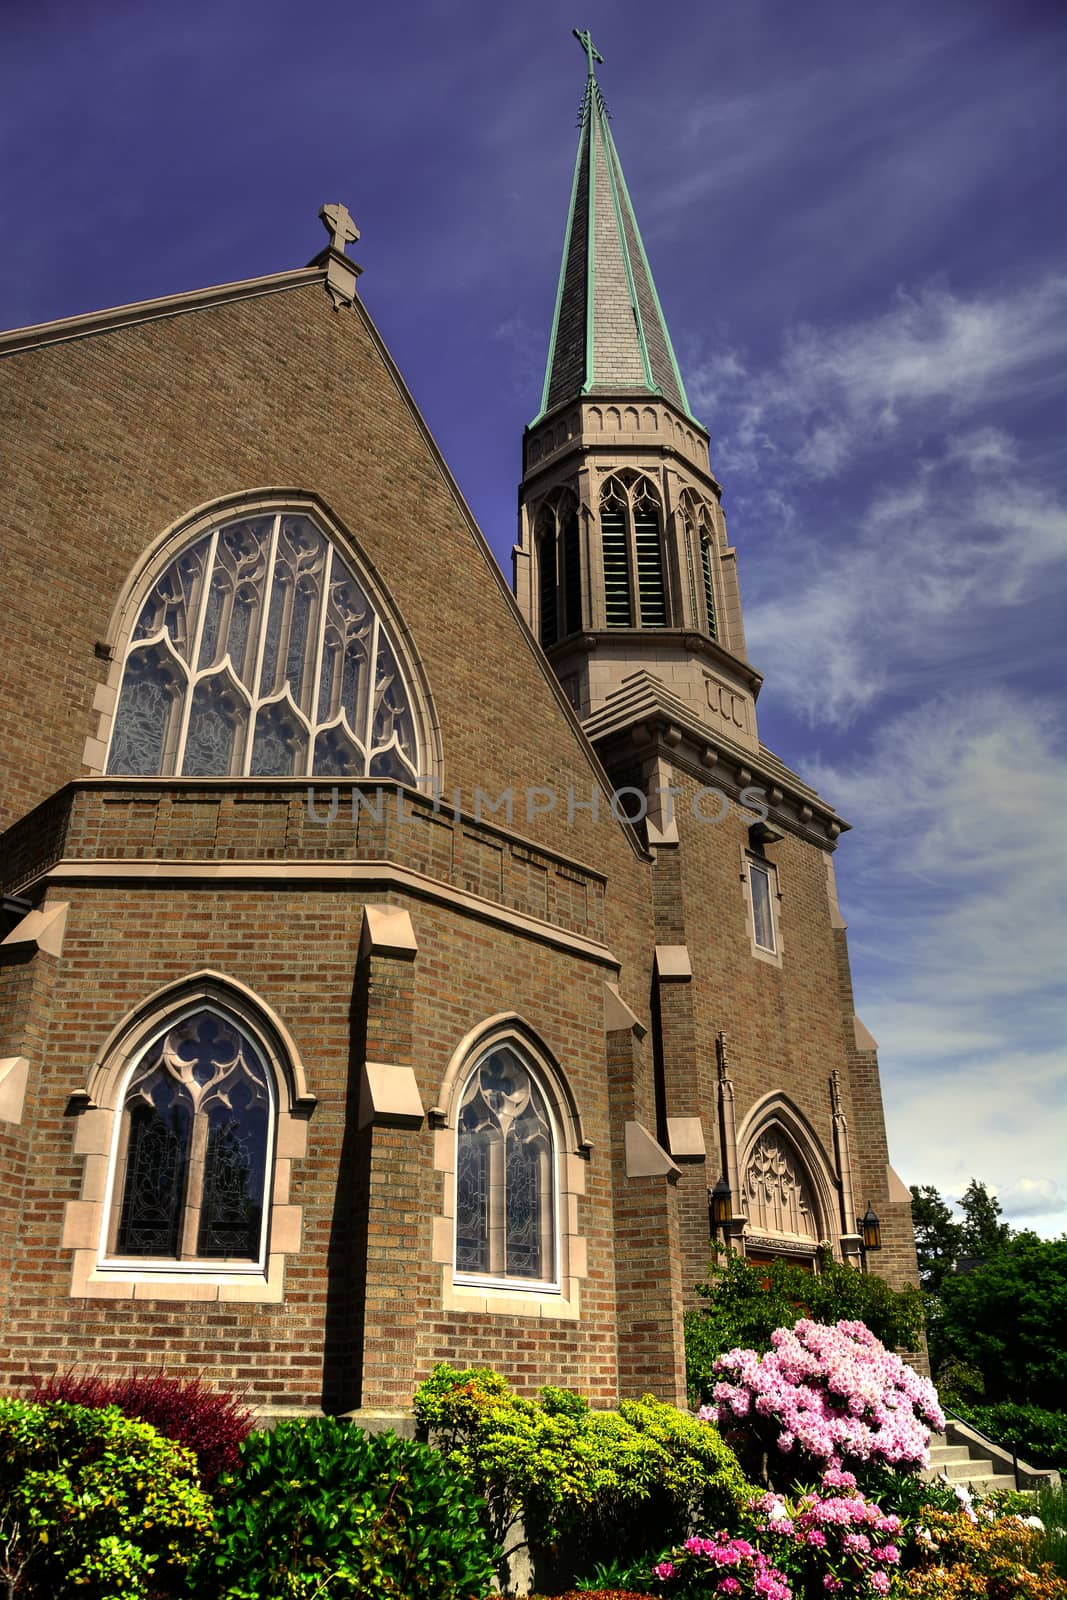 Gothic Church in Bellingham, WA with blue sky and whispy clouds